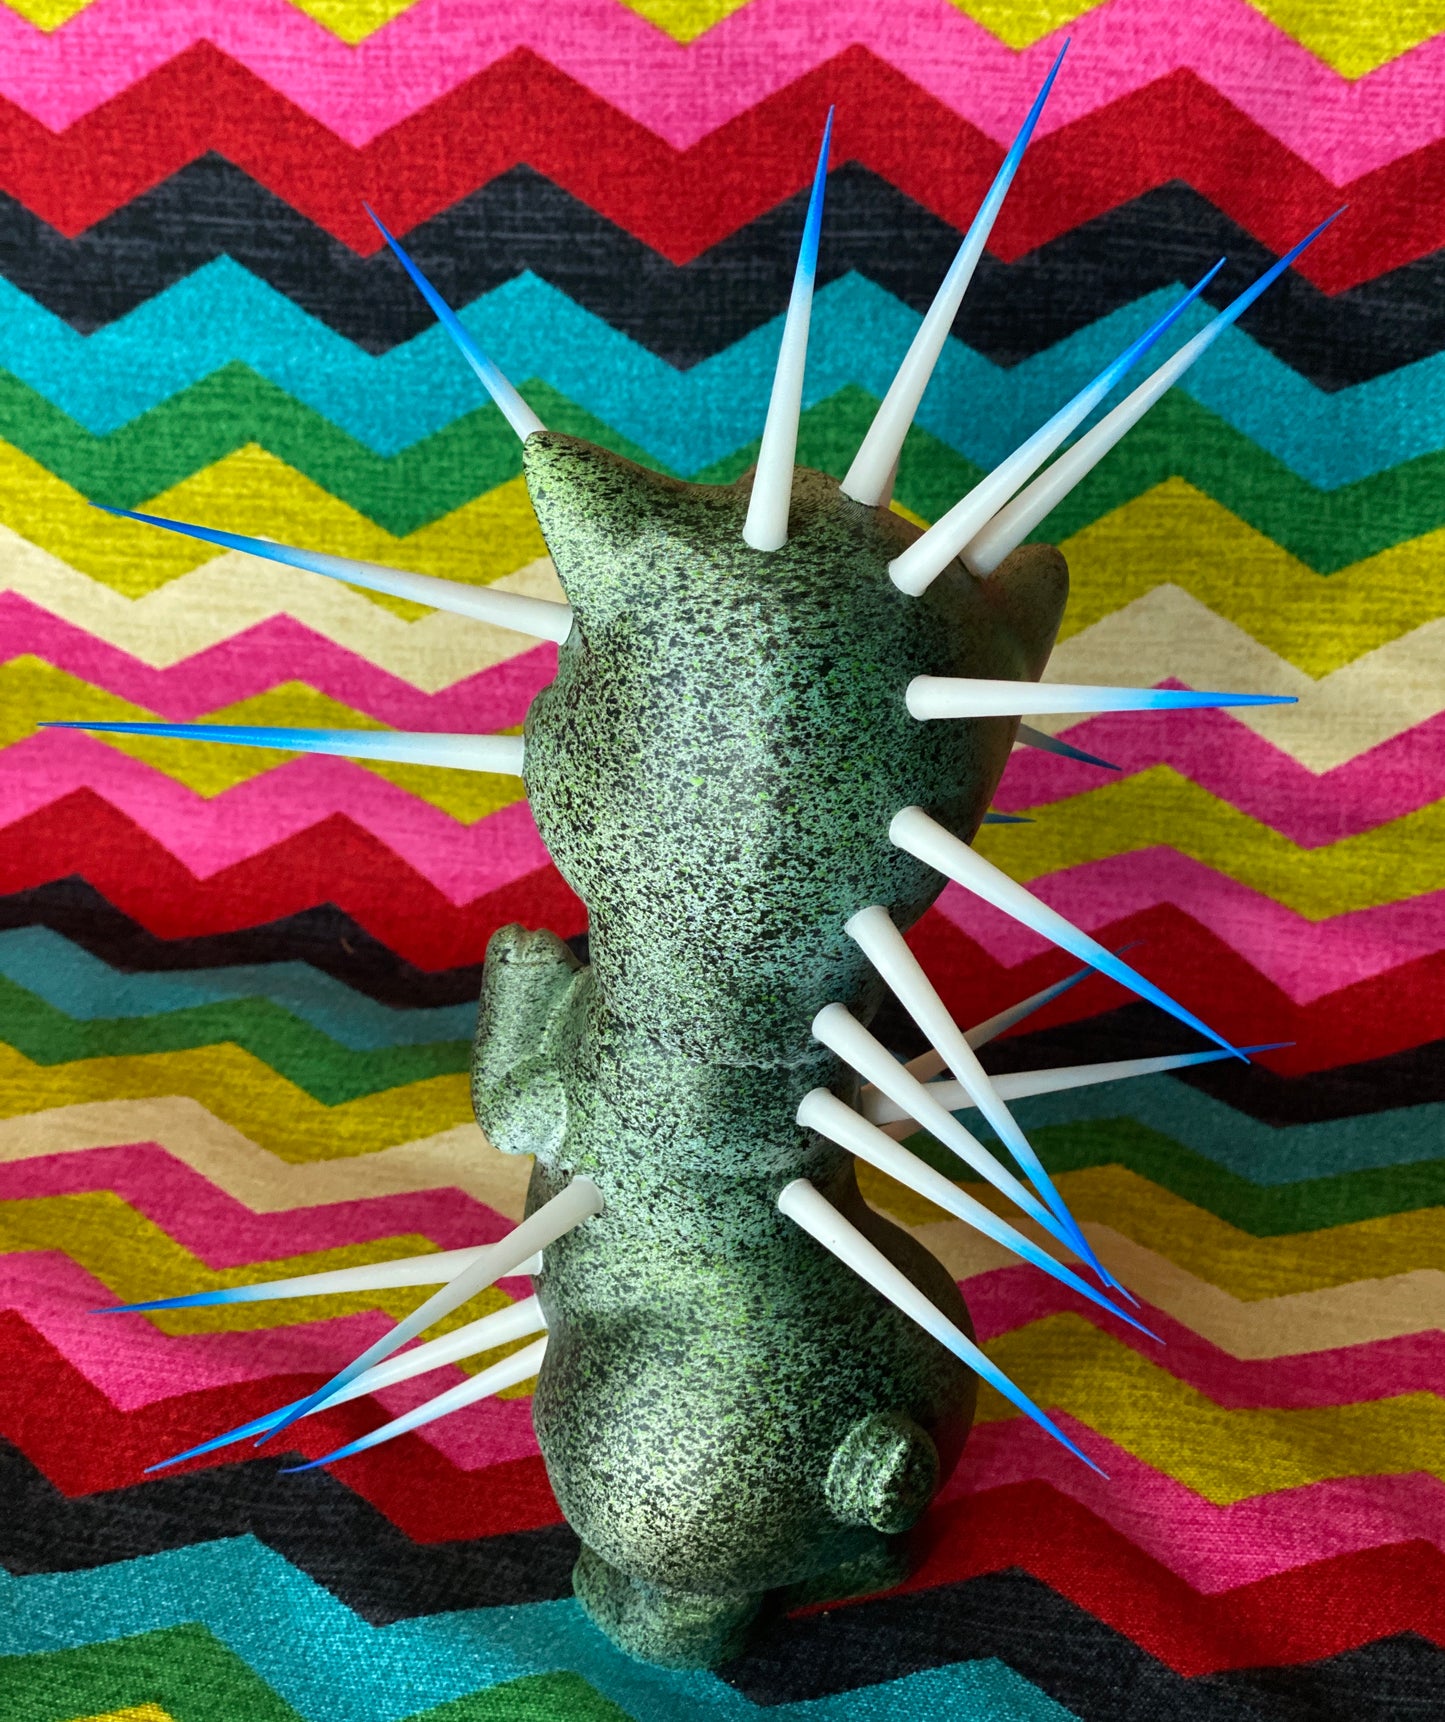 Twisty Pig with Slender Spikes